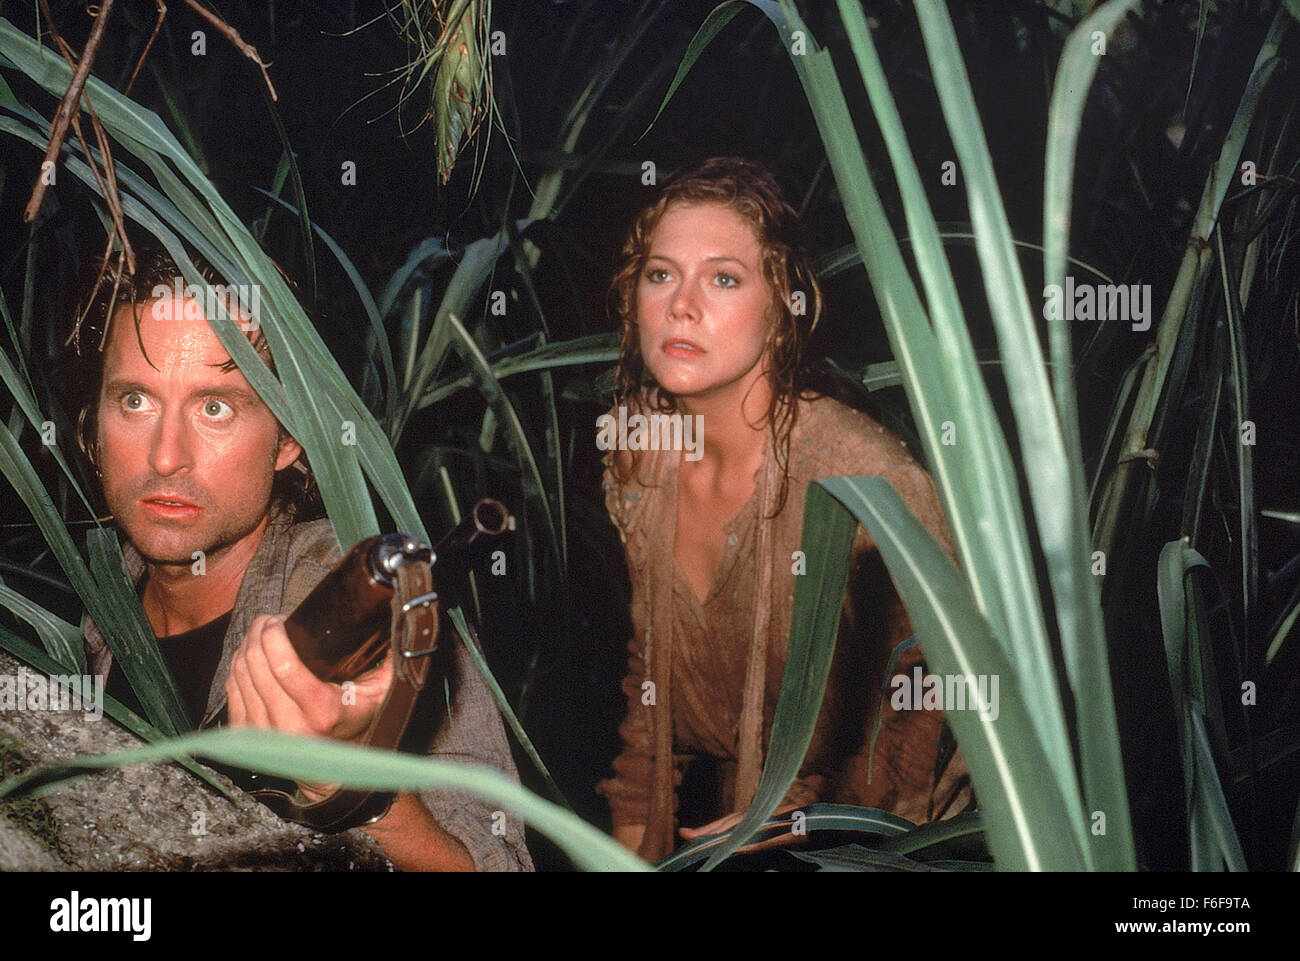 Mar 30, 1984; Los Angeles, CA, USA; Actor MICHAEL DOUGLAS stars as Jack T. Colton and KATHLEEN TURNER as Joan Wilder in the 20th Century Fox action comedy, 'Romancing the Stone.' Directed by Robert Zemeckis. Stock Photo